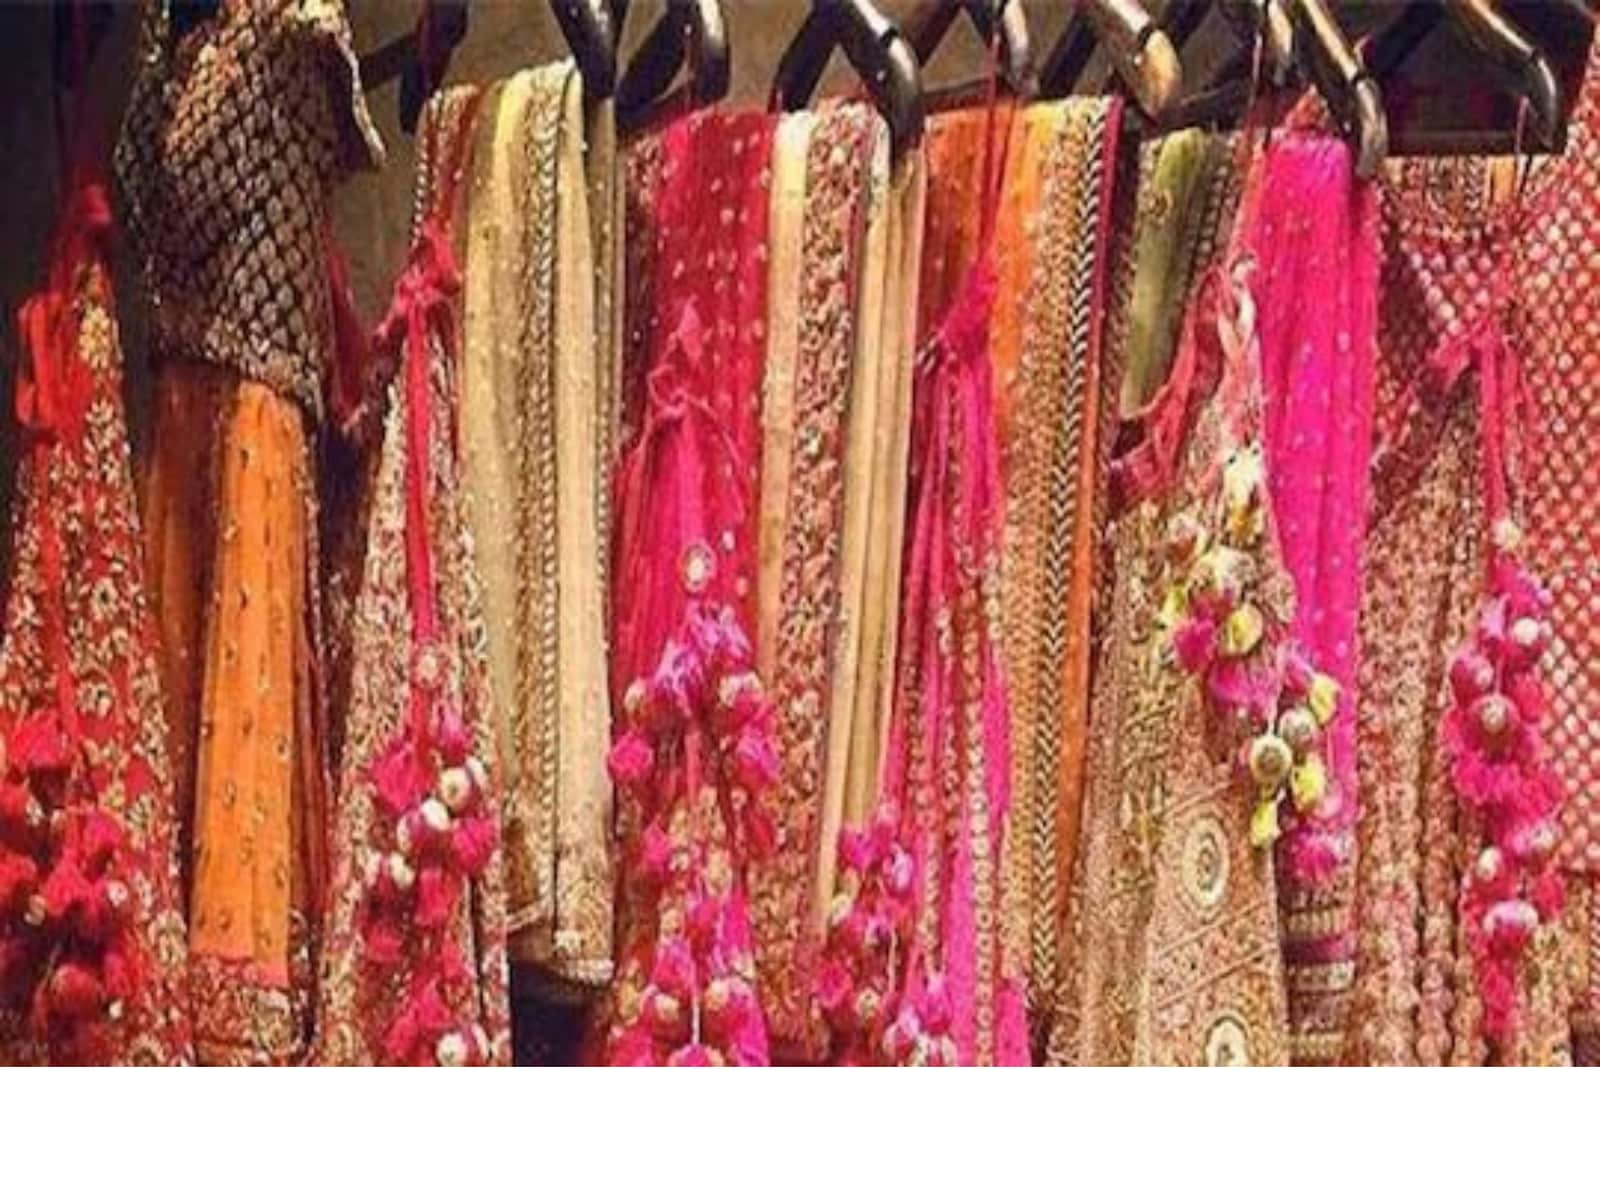 What is shopping experience of ordering lehengas from chandini Chowk online  by watching some random YouTube videos? - Quora